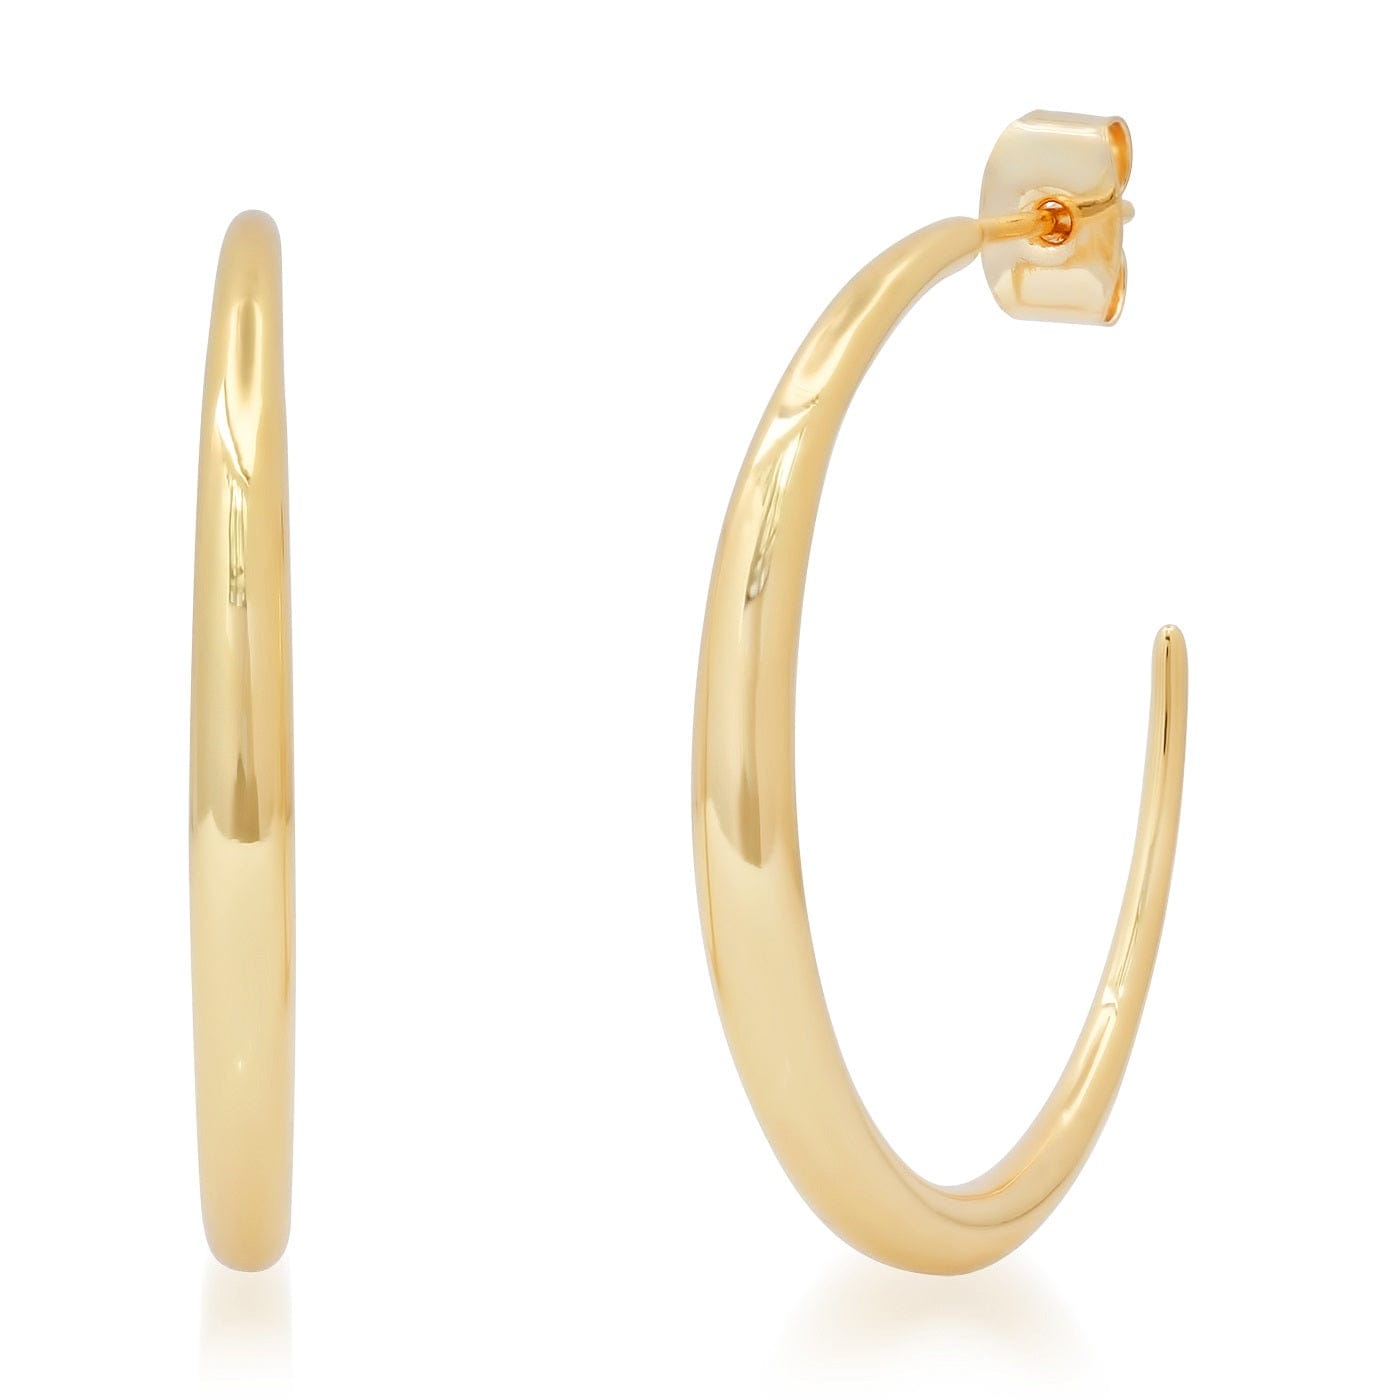 TAI JEWELRY Earrings Large Gold Curved Graduated Hoops